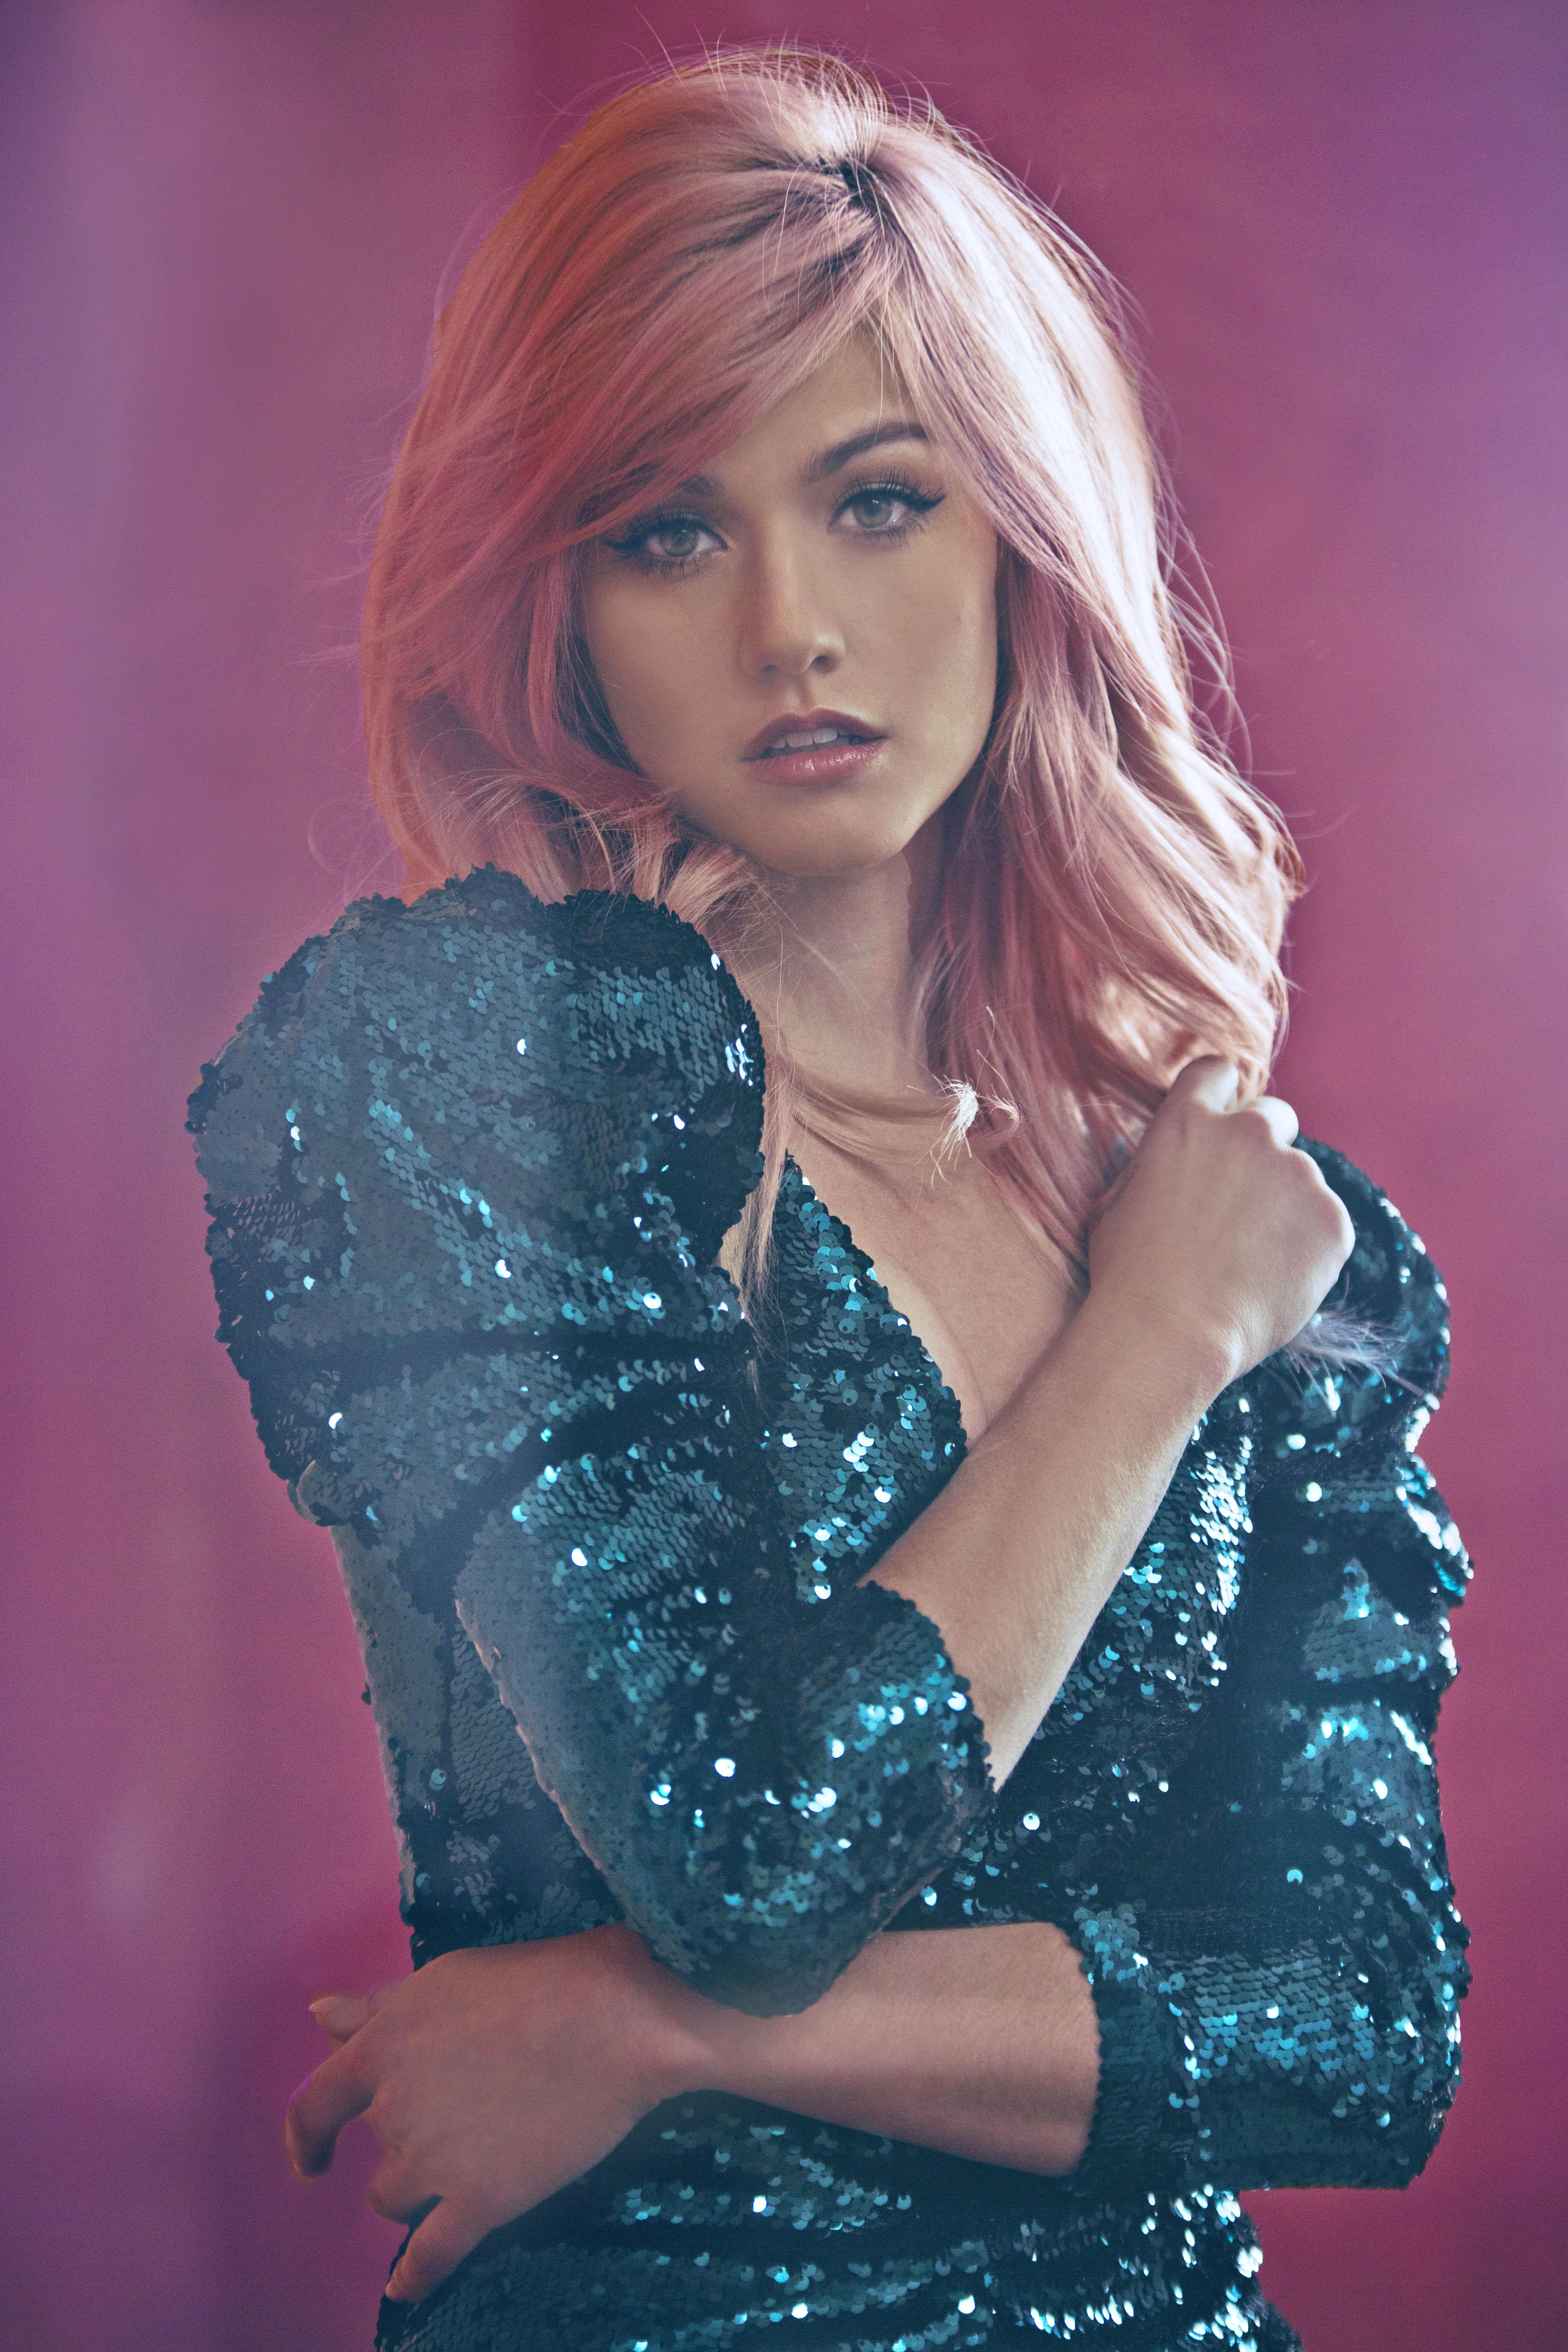 Katherine Mcnamara For Qpmag March 2020 Image Id 350558 Image Abyss 9374